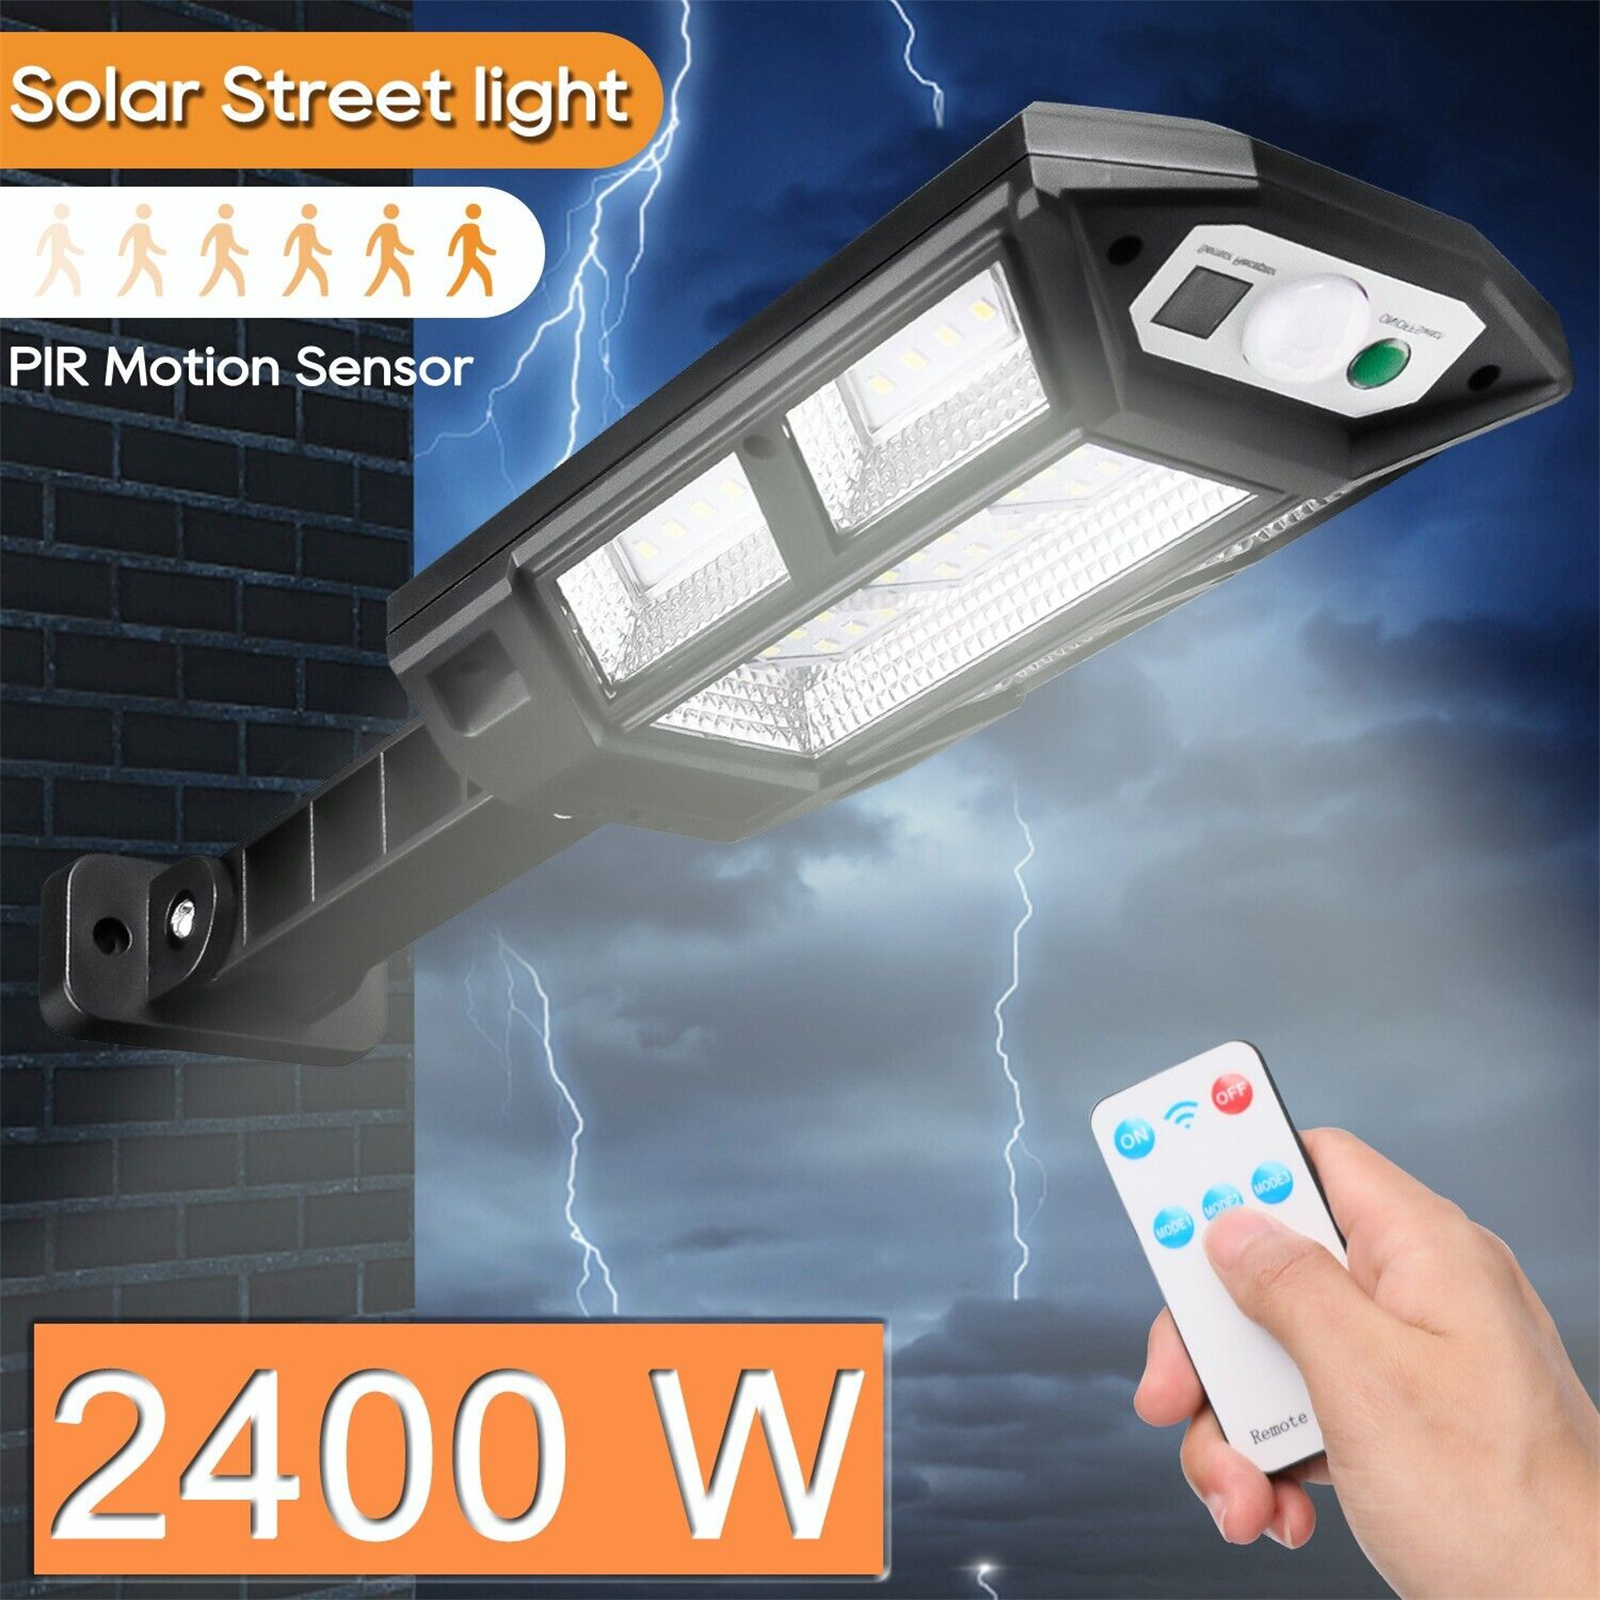 

2400w Led Solar Flood Light With Remote Control 3 Lighting Modes Motion Sensor Outdoor Security Street Lamp For Outdoor Lighting, Enclosure, Event, Party, Bbq Lighting